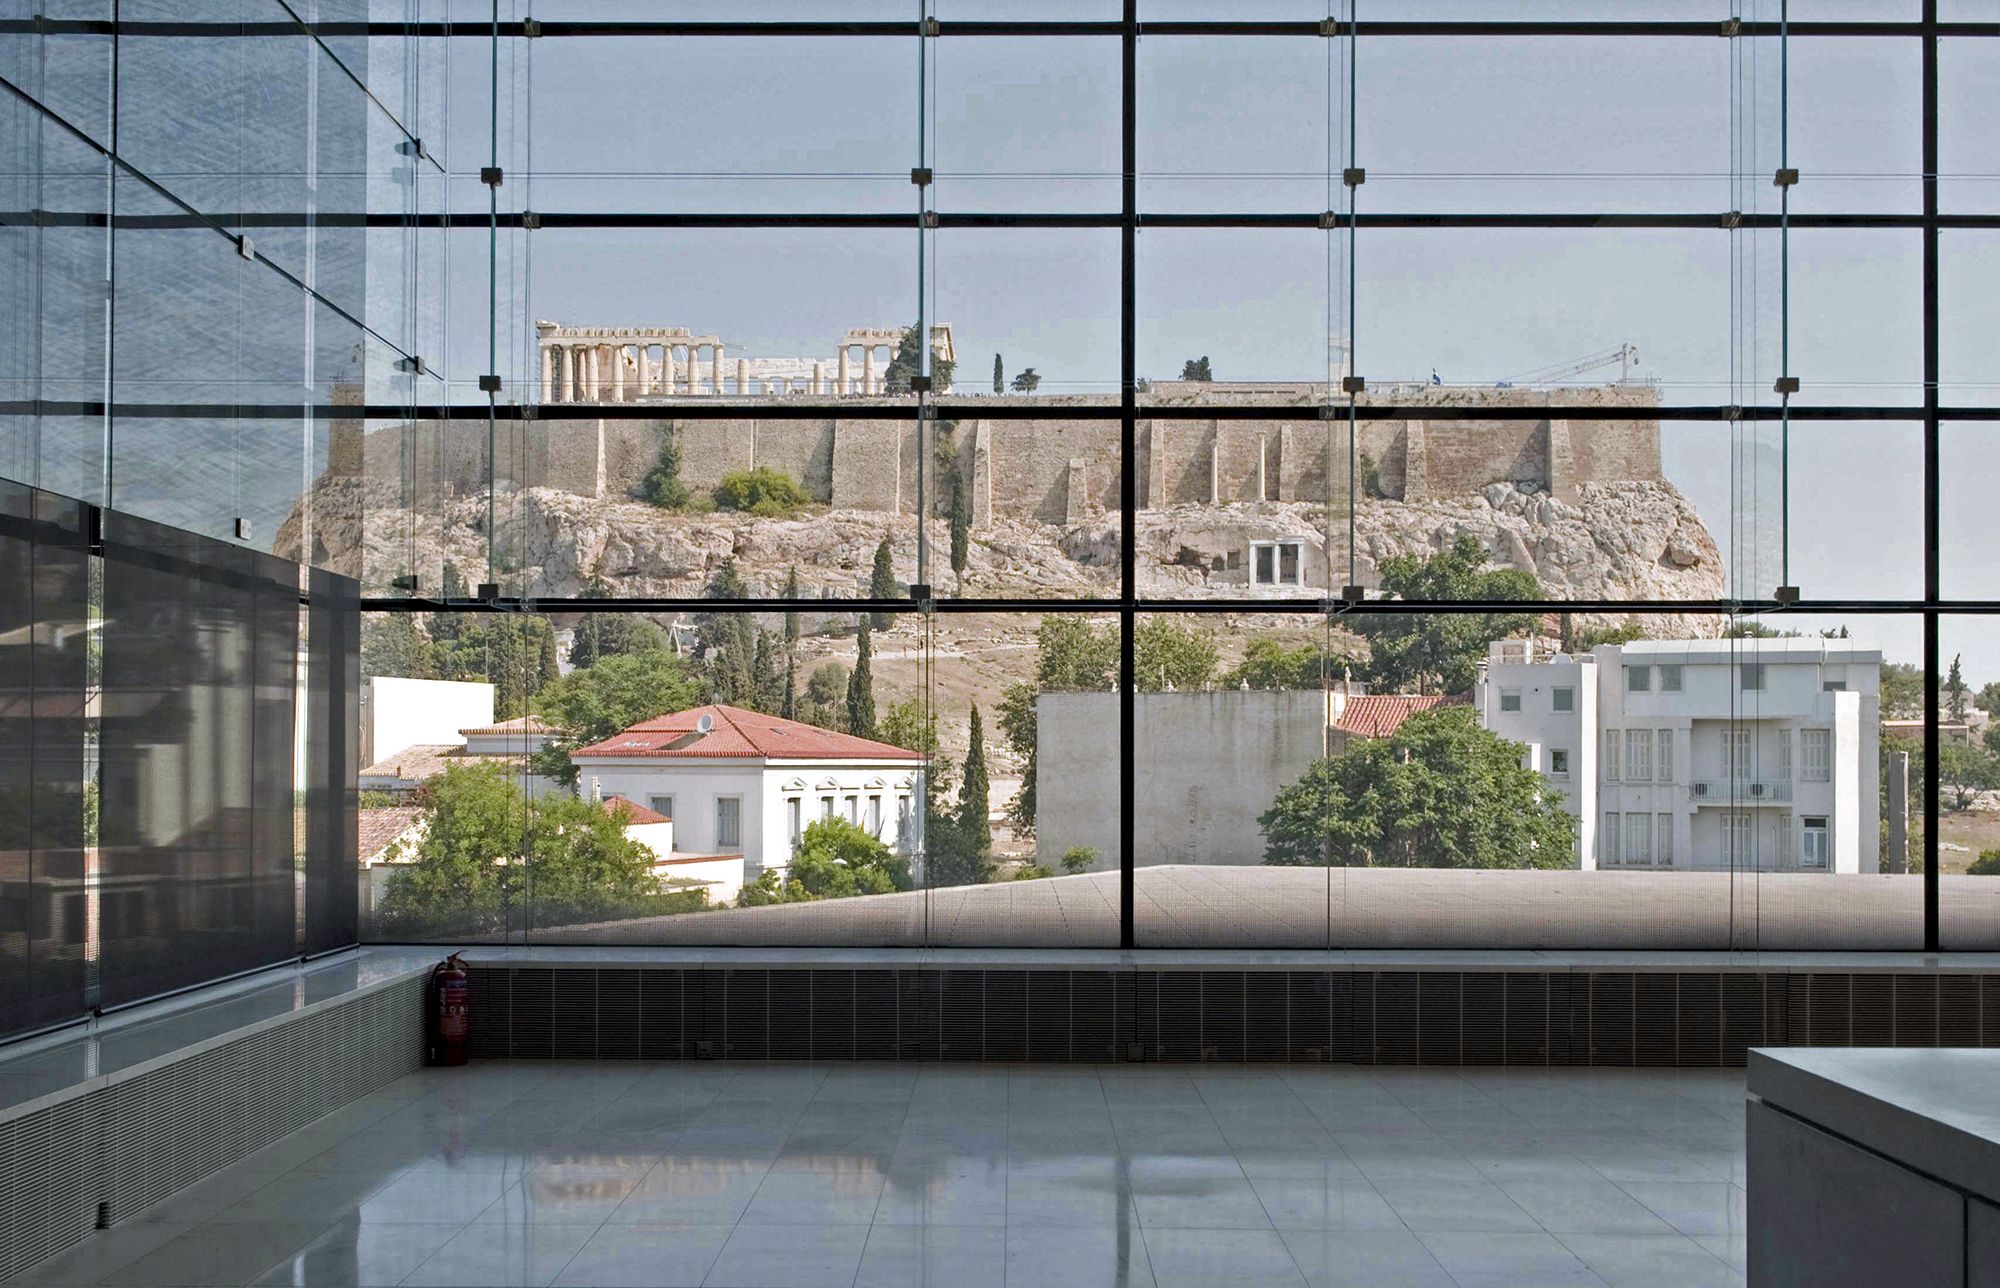 A view of the Acropolis from the Acropolis Museum, in Athens, Greece.